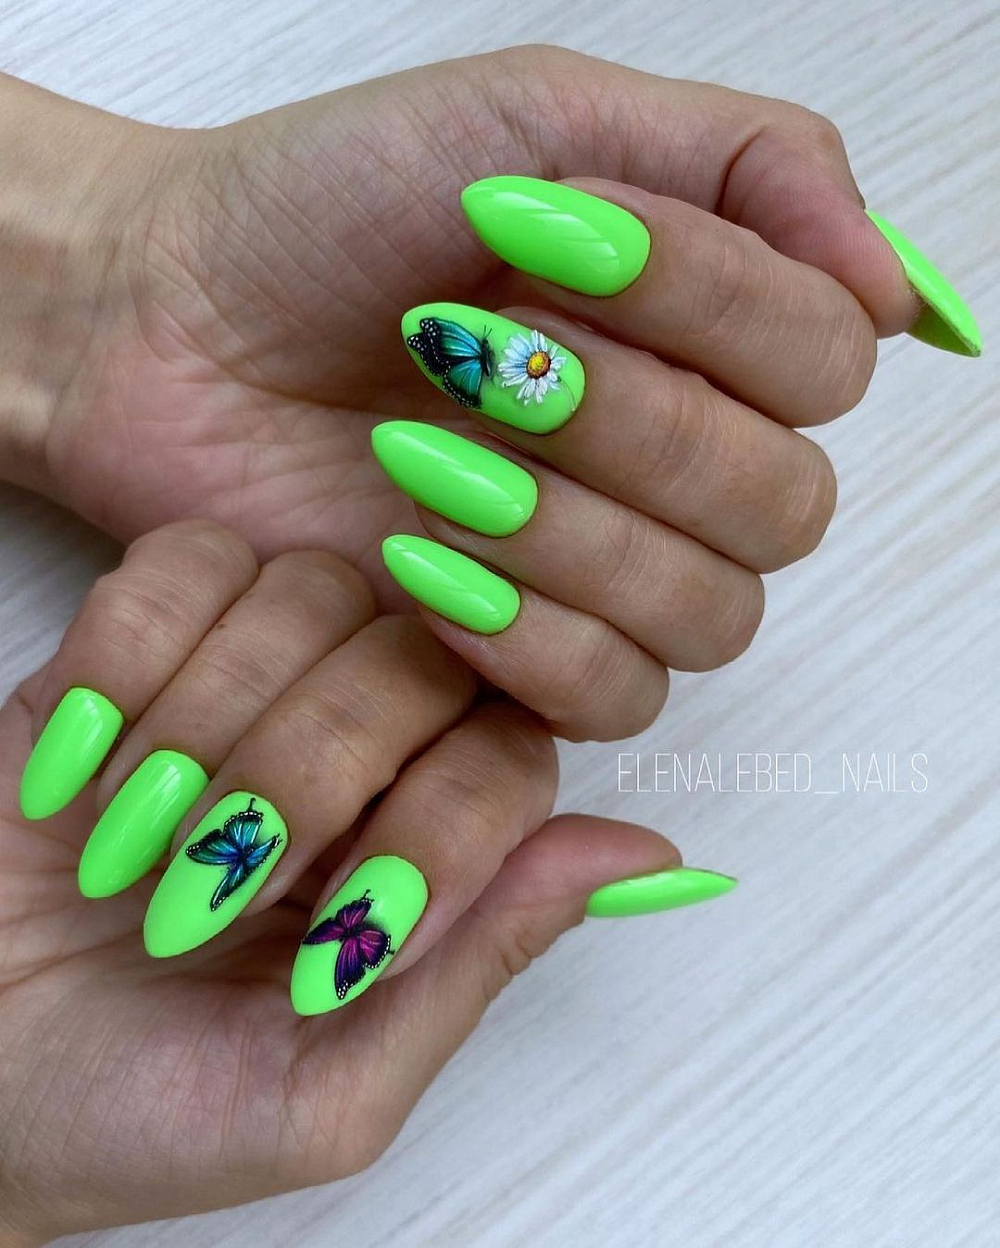 Мастер: @elenalebed_nails (https://www.instagram.com/elenalebed_nails/)